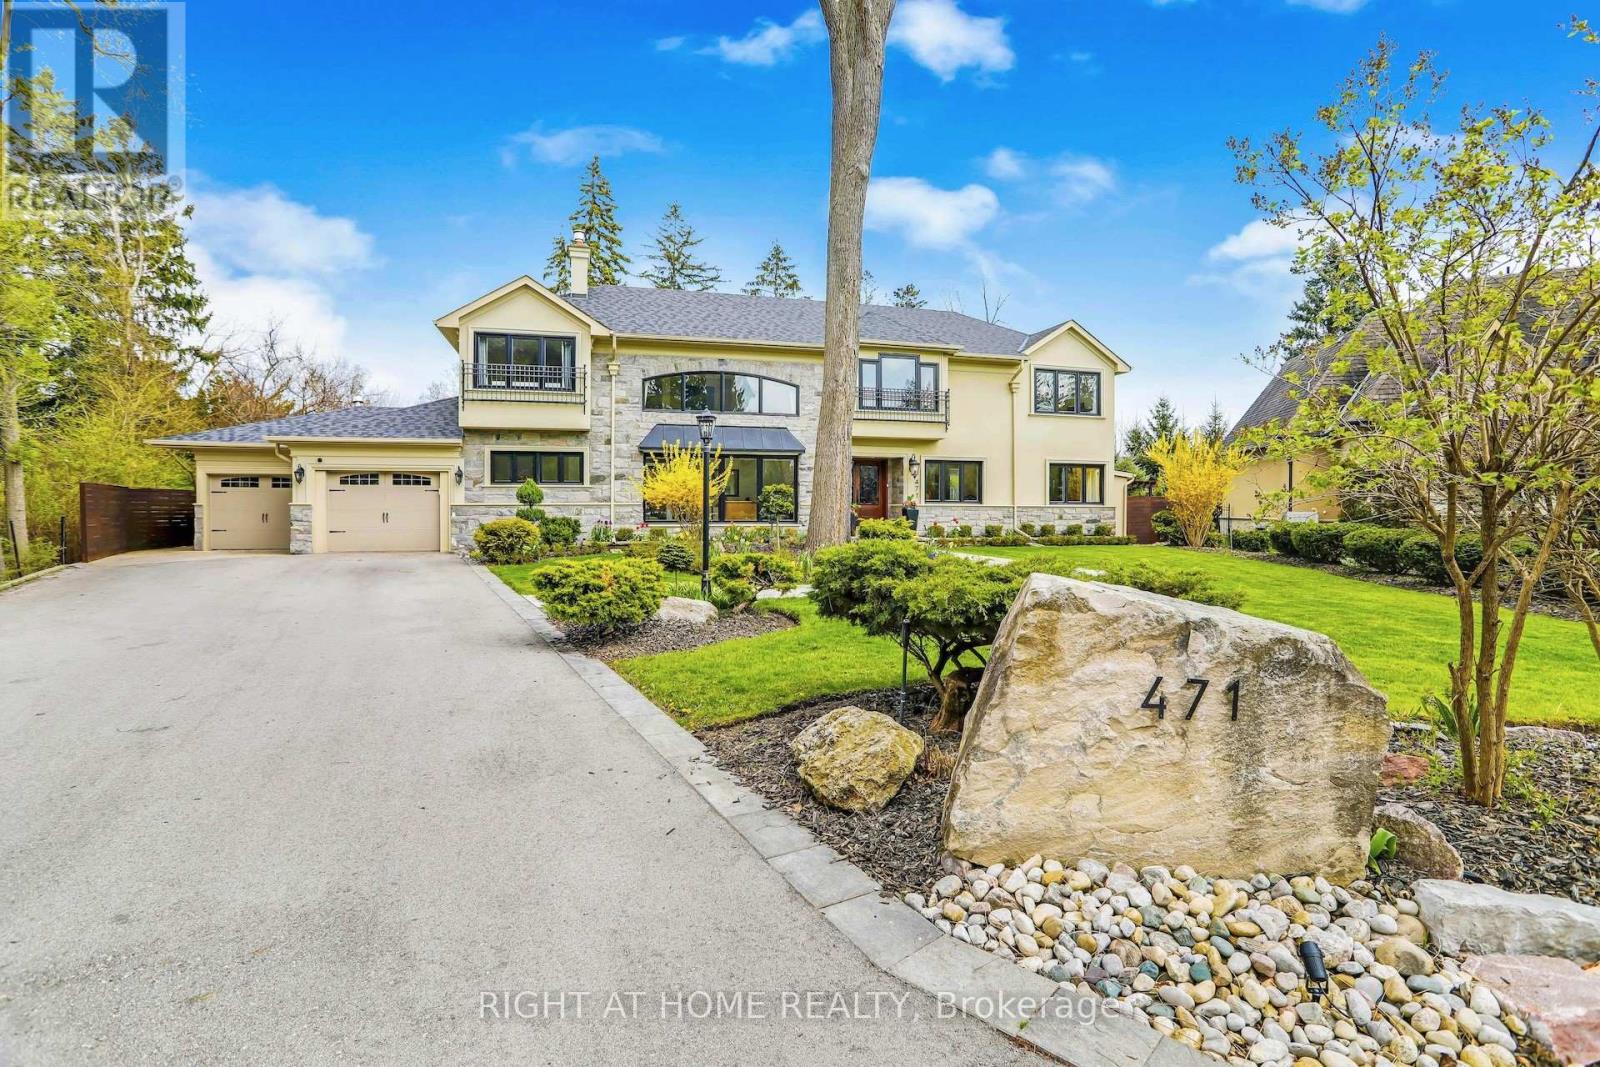 471 COUNTRY CLUB CRESCENT, mississauga, Ontario